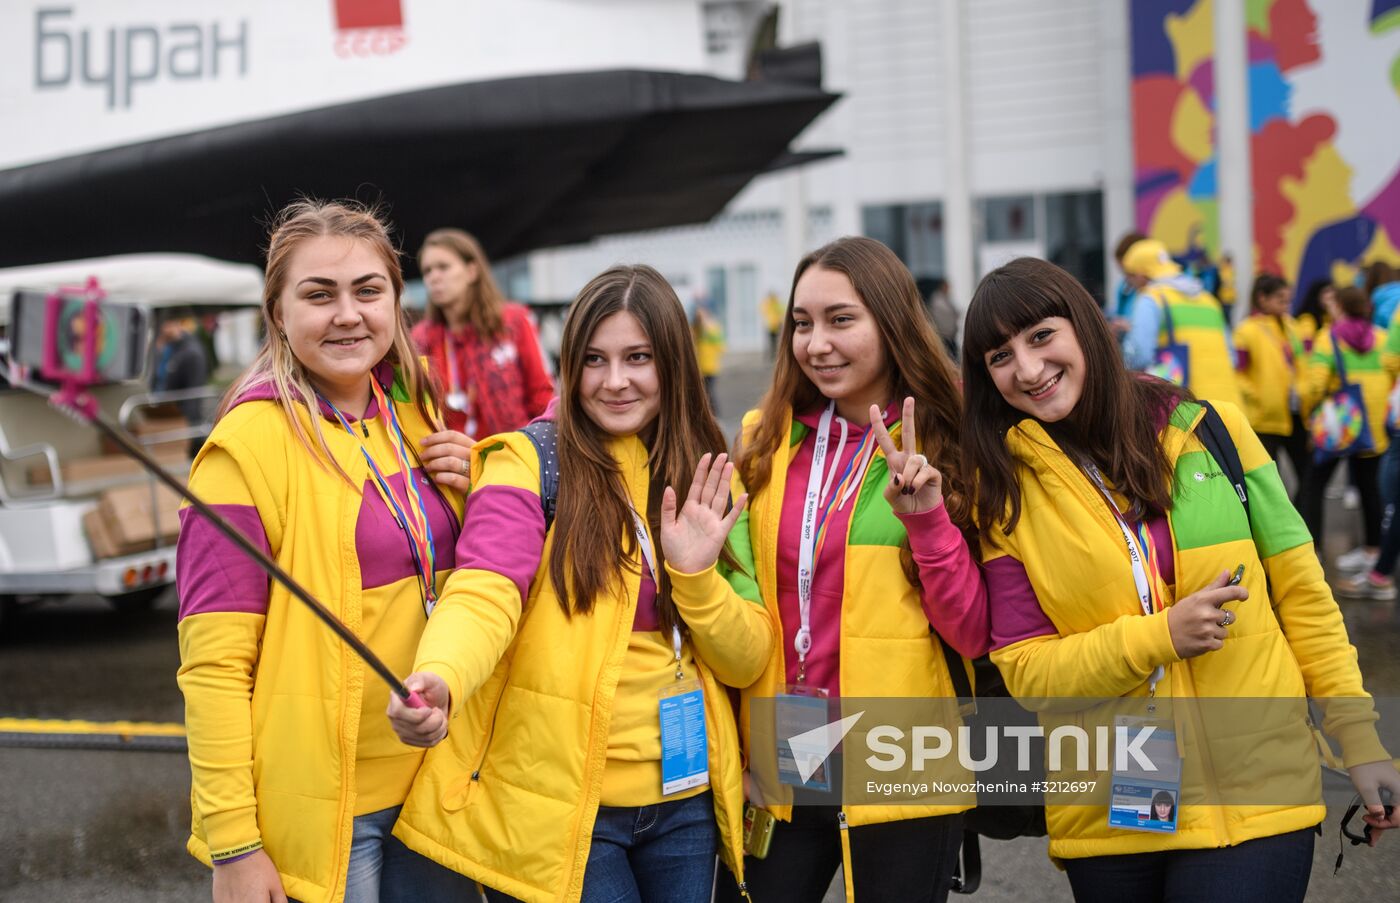 The 19th World Festival of Youth and Students. Day One